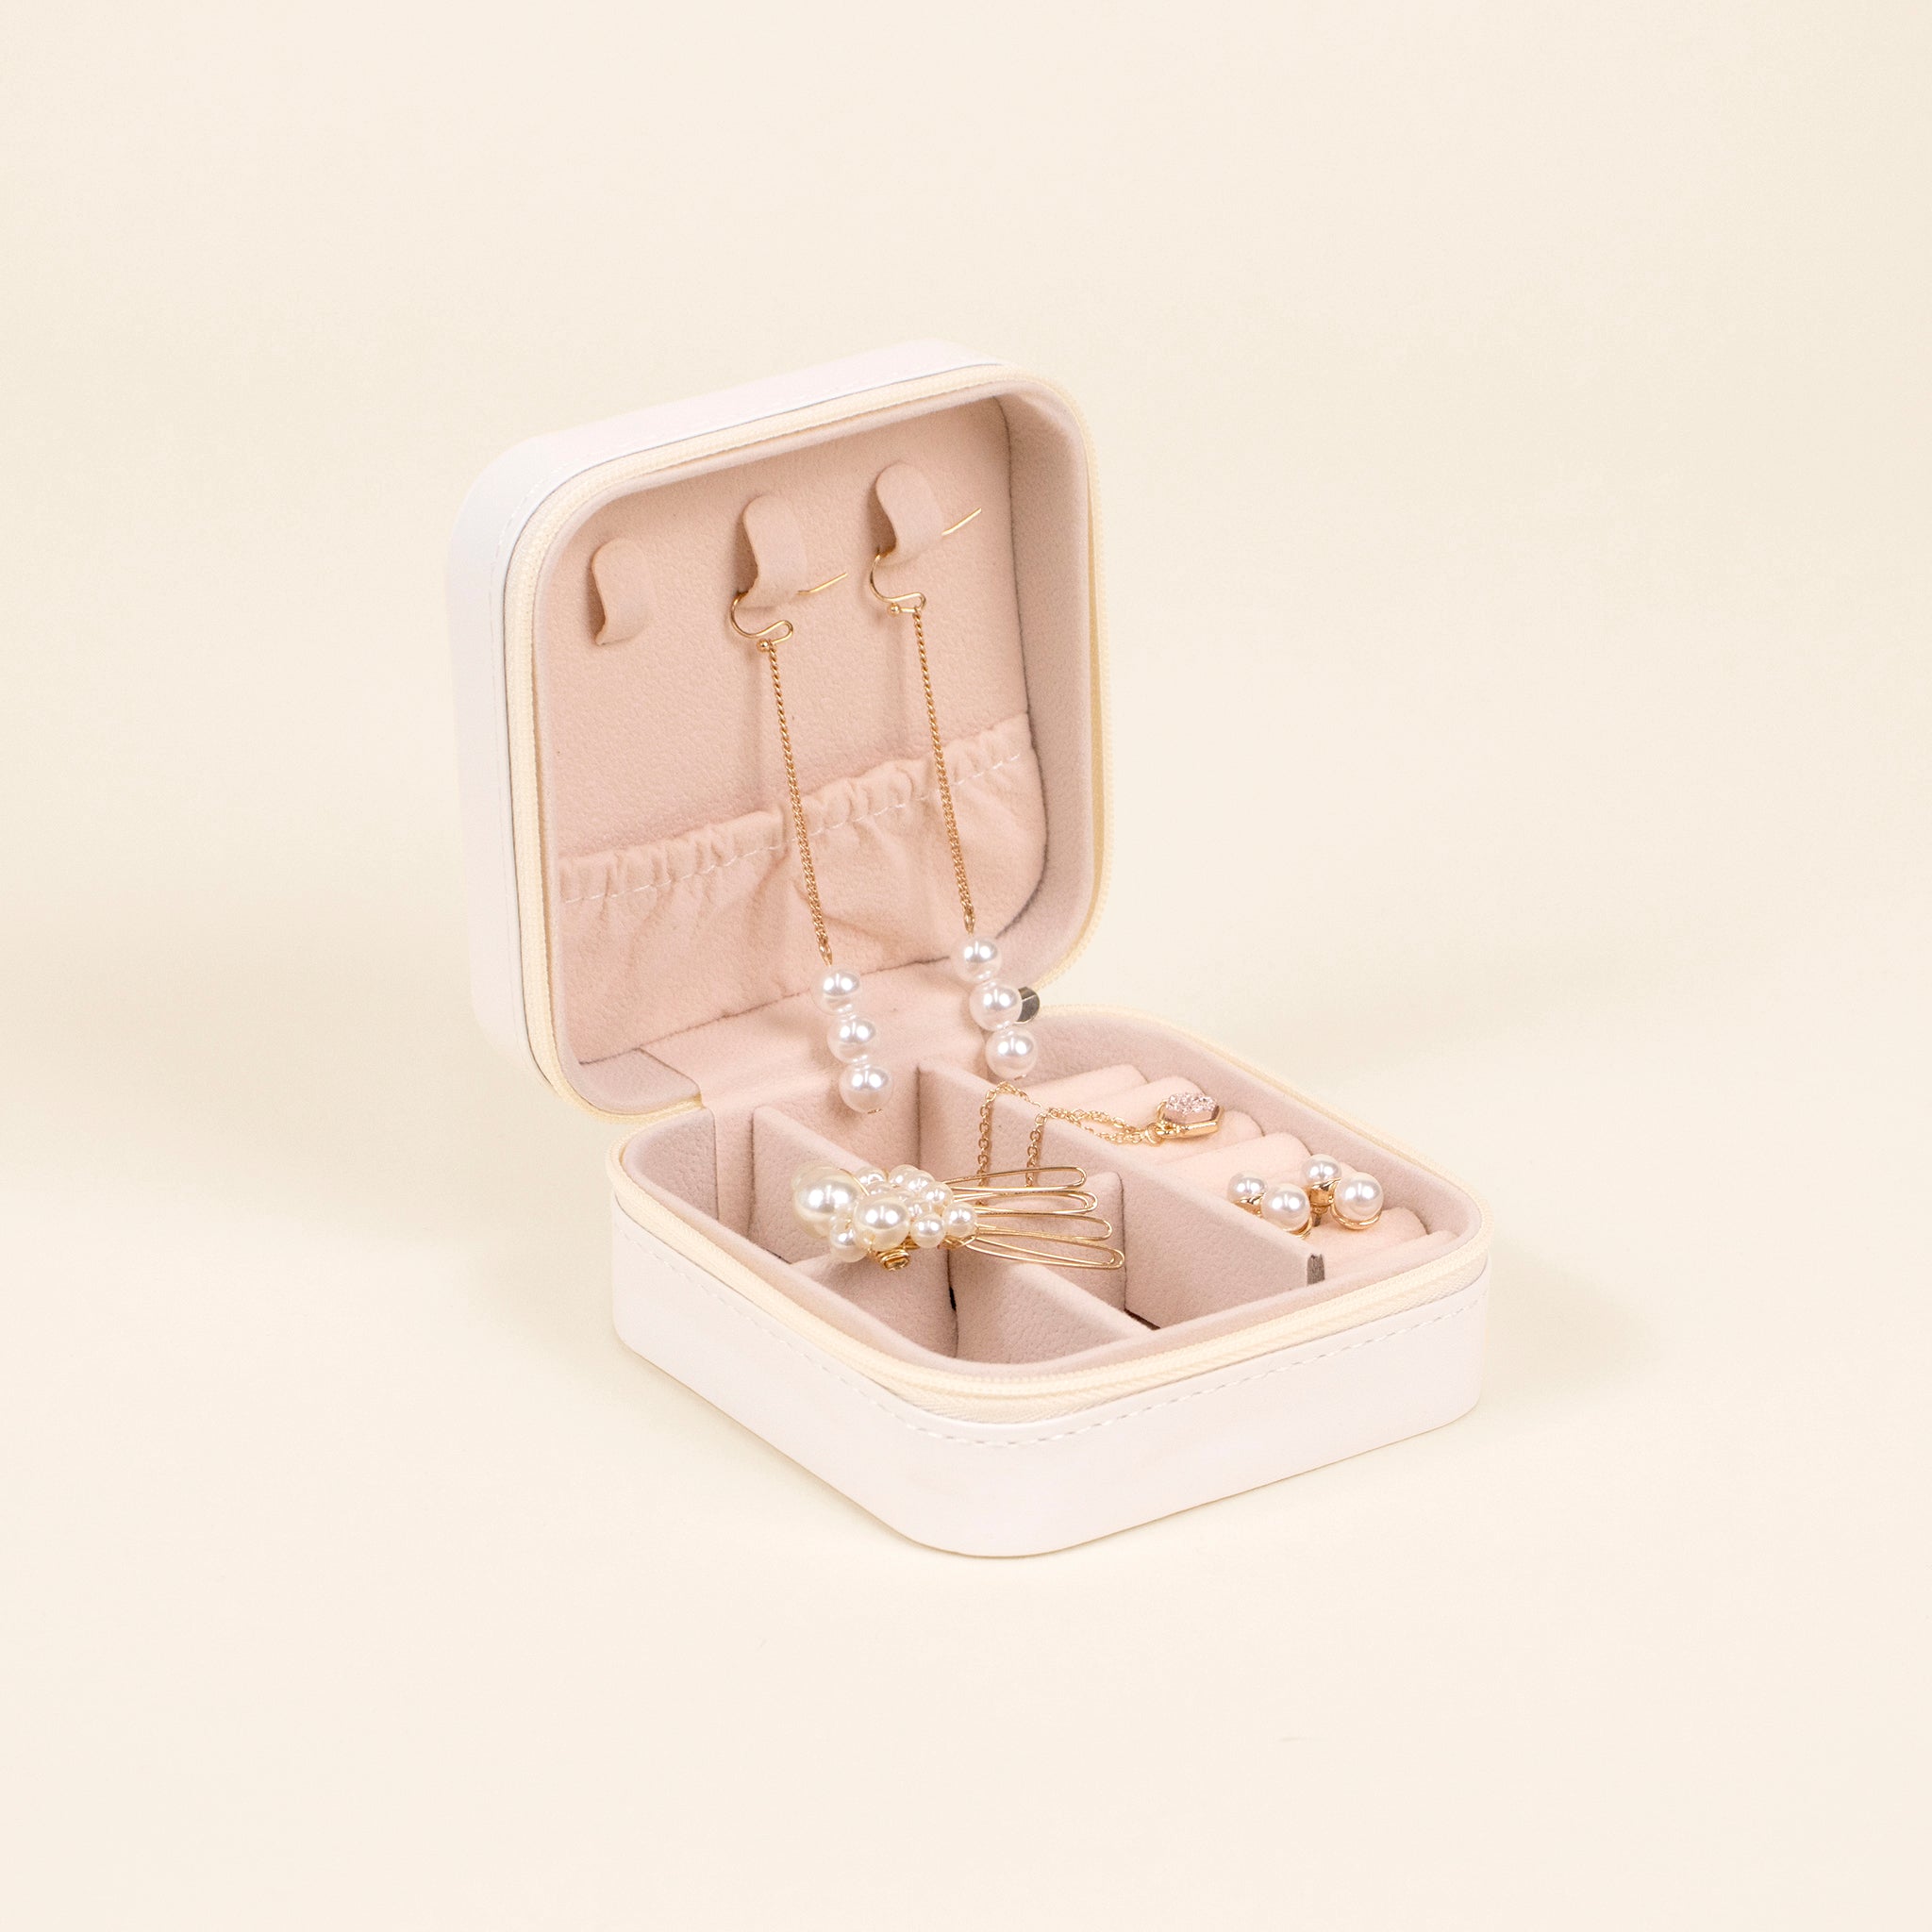 Interior view of the White Jewelry Box contains dangling and stud earrings, hair clips, and necklaces hanging from tabs or tucked into individual compartments and slots. The interior material is blush pink in color. 